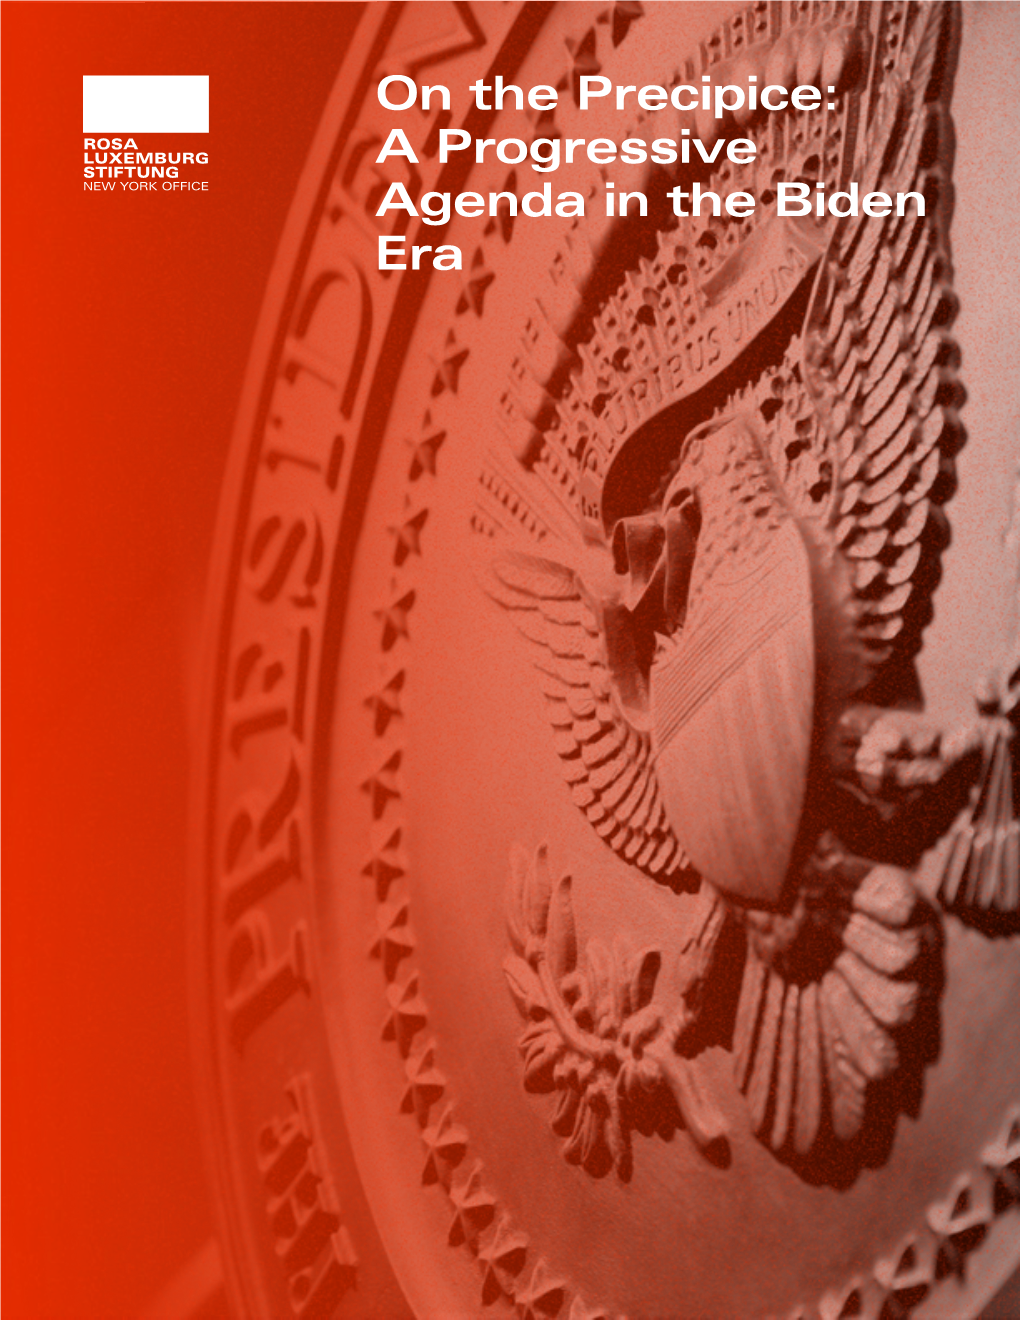 On the Precipice: a Progressive Agenda in the Biden Era Published by the Rosa Luxemburg Stiftung, New York Office, May 2020